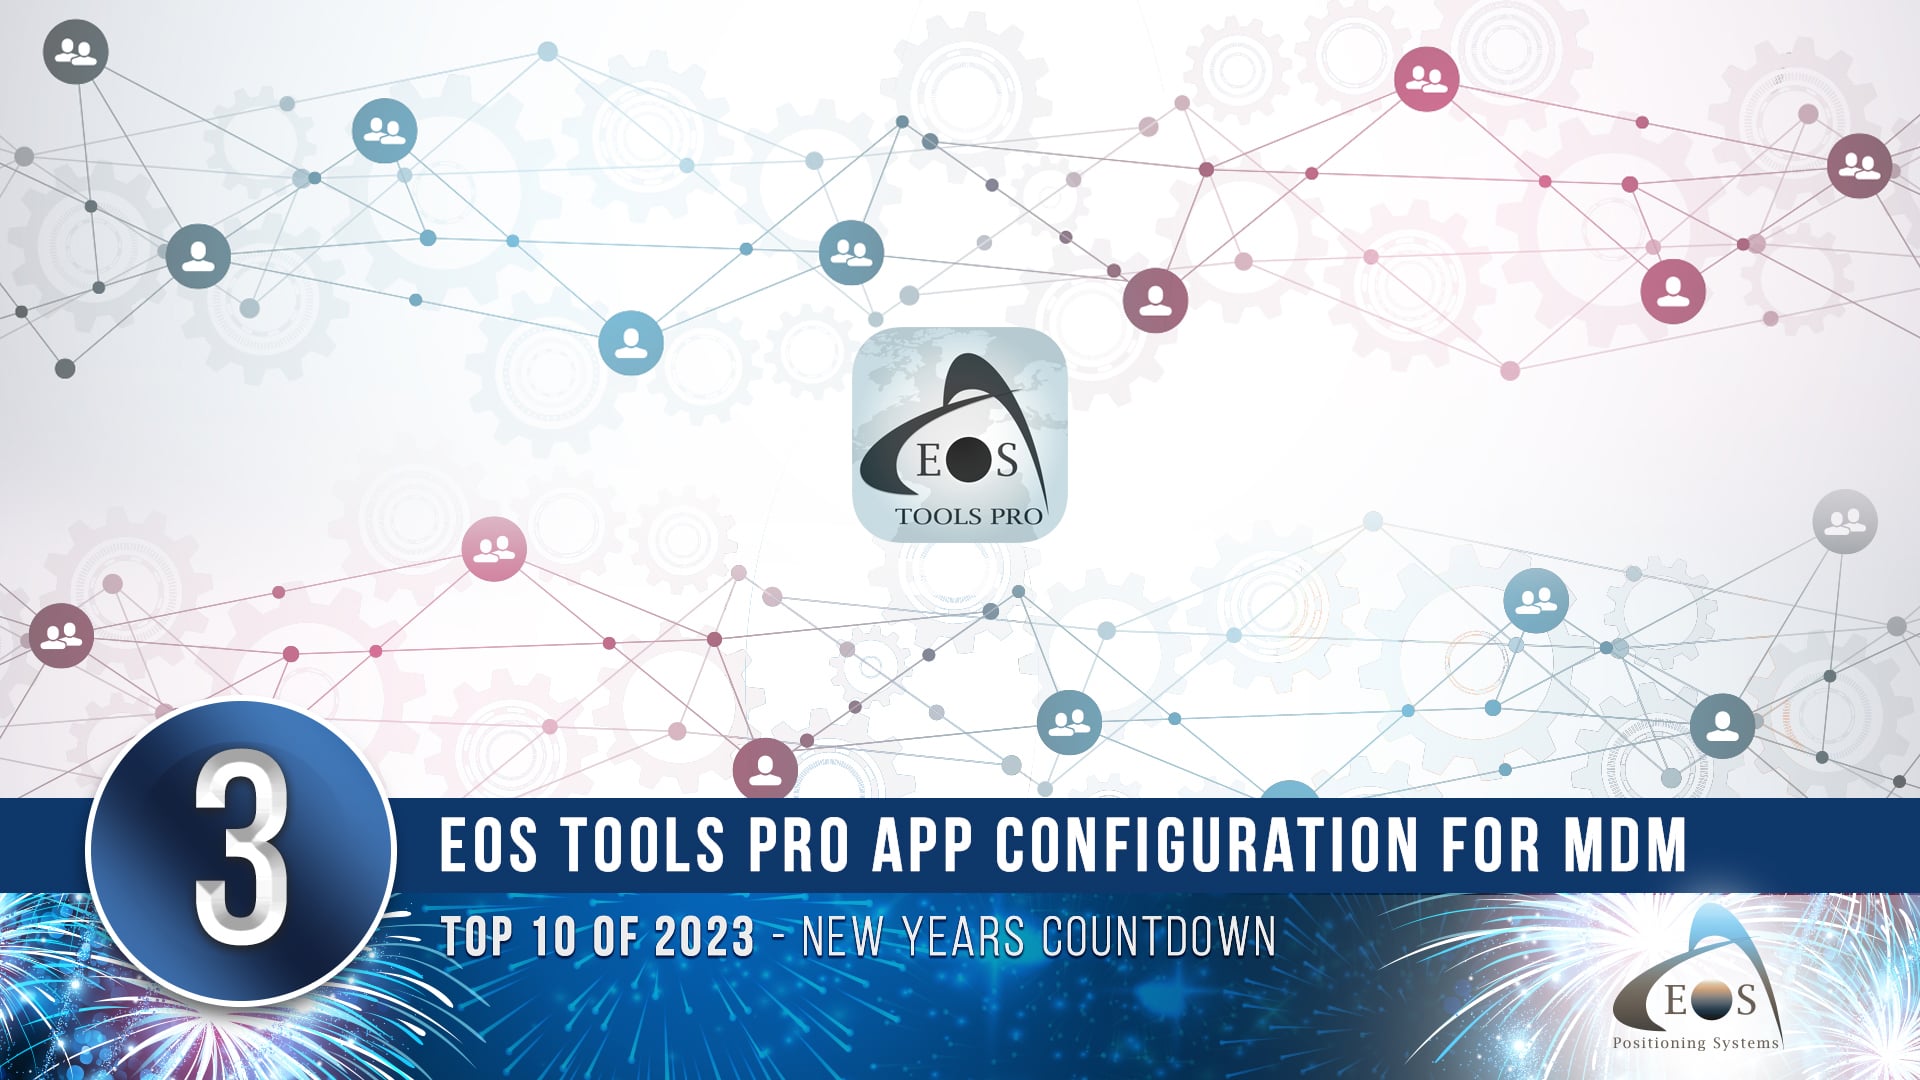 3 - Eos Tools Pro App Configuration for Mobile Device Management MDM Top 10 of 2023